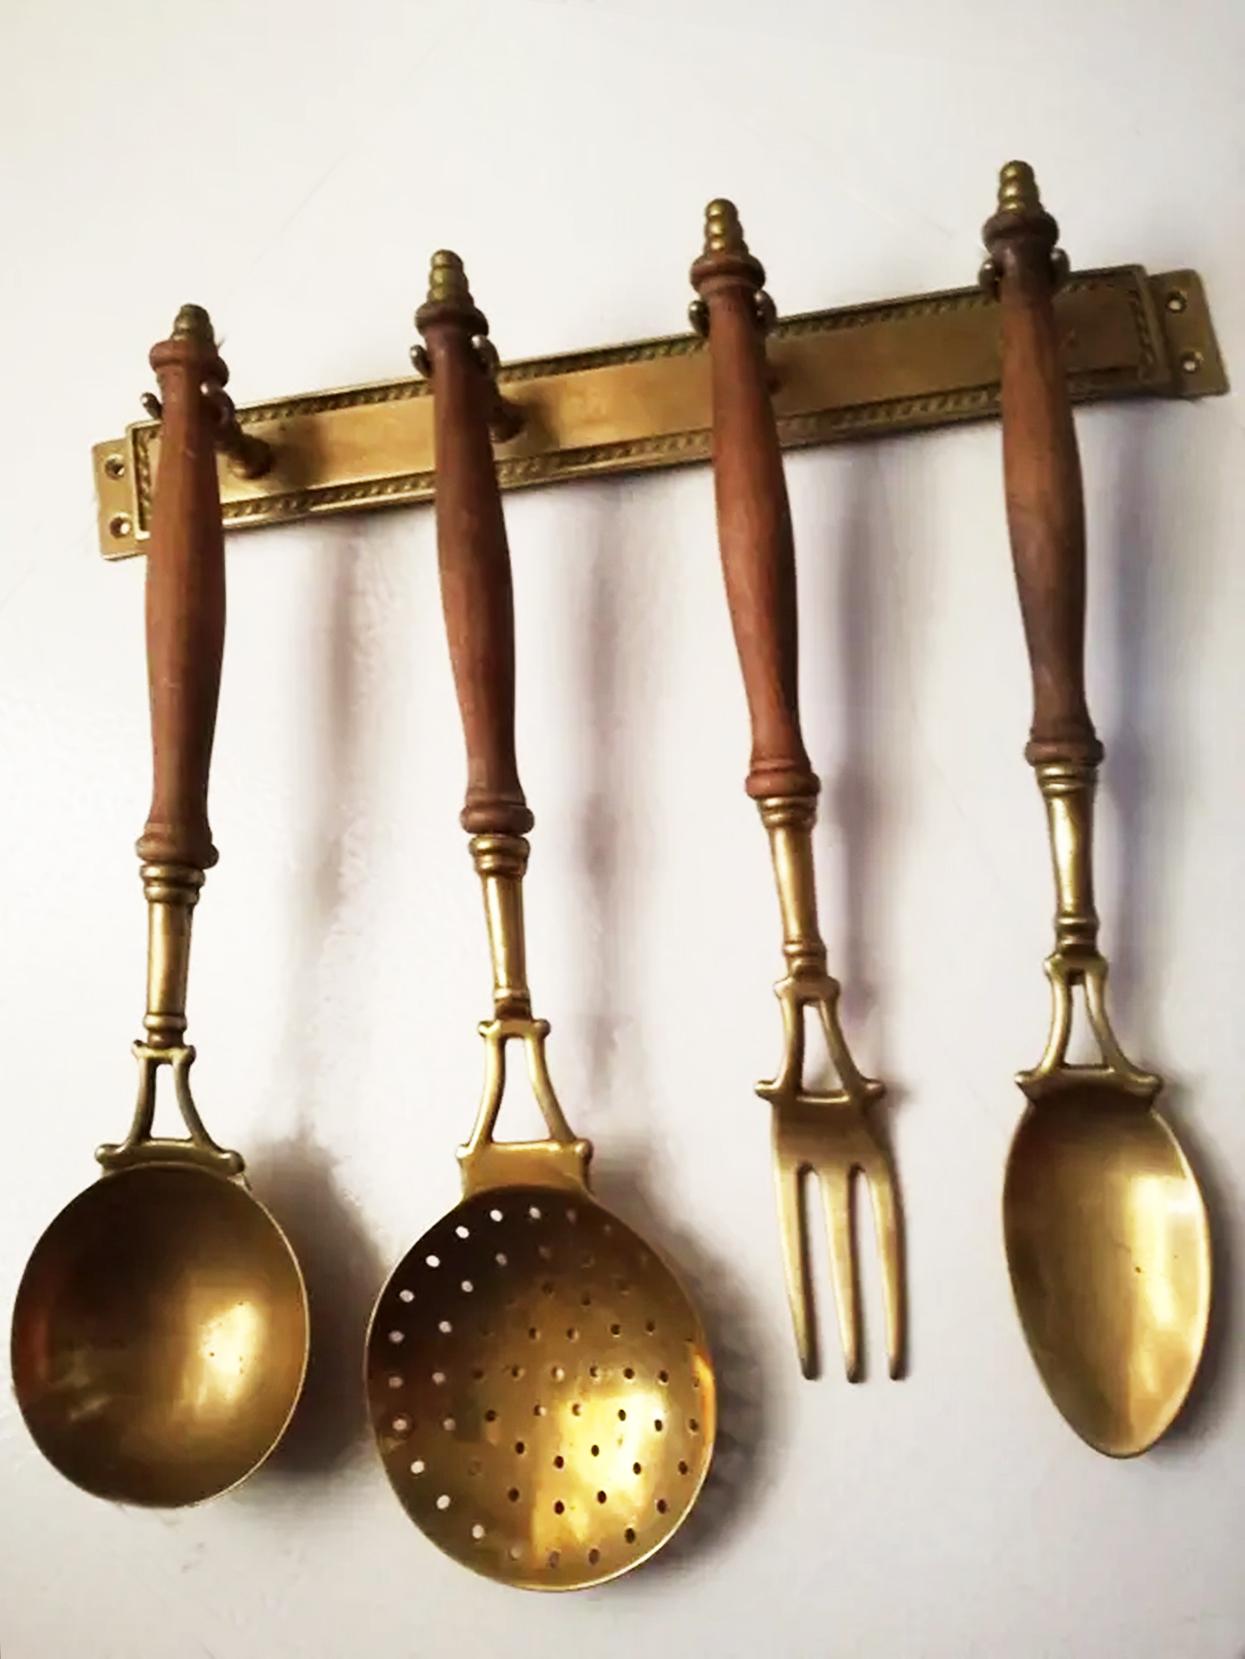 Old Kitchen Utensils Made of Brass with from a Hanging Bar, Early 20th Century 2